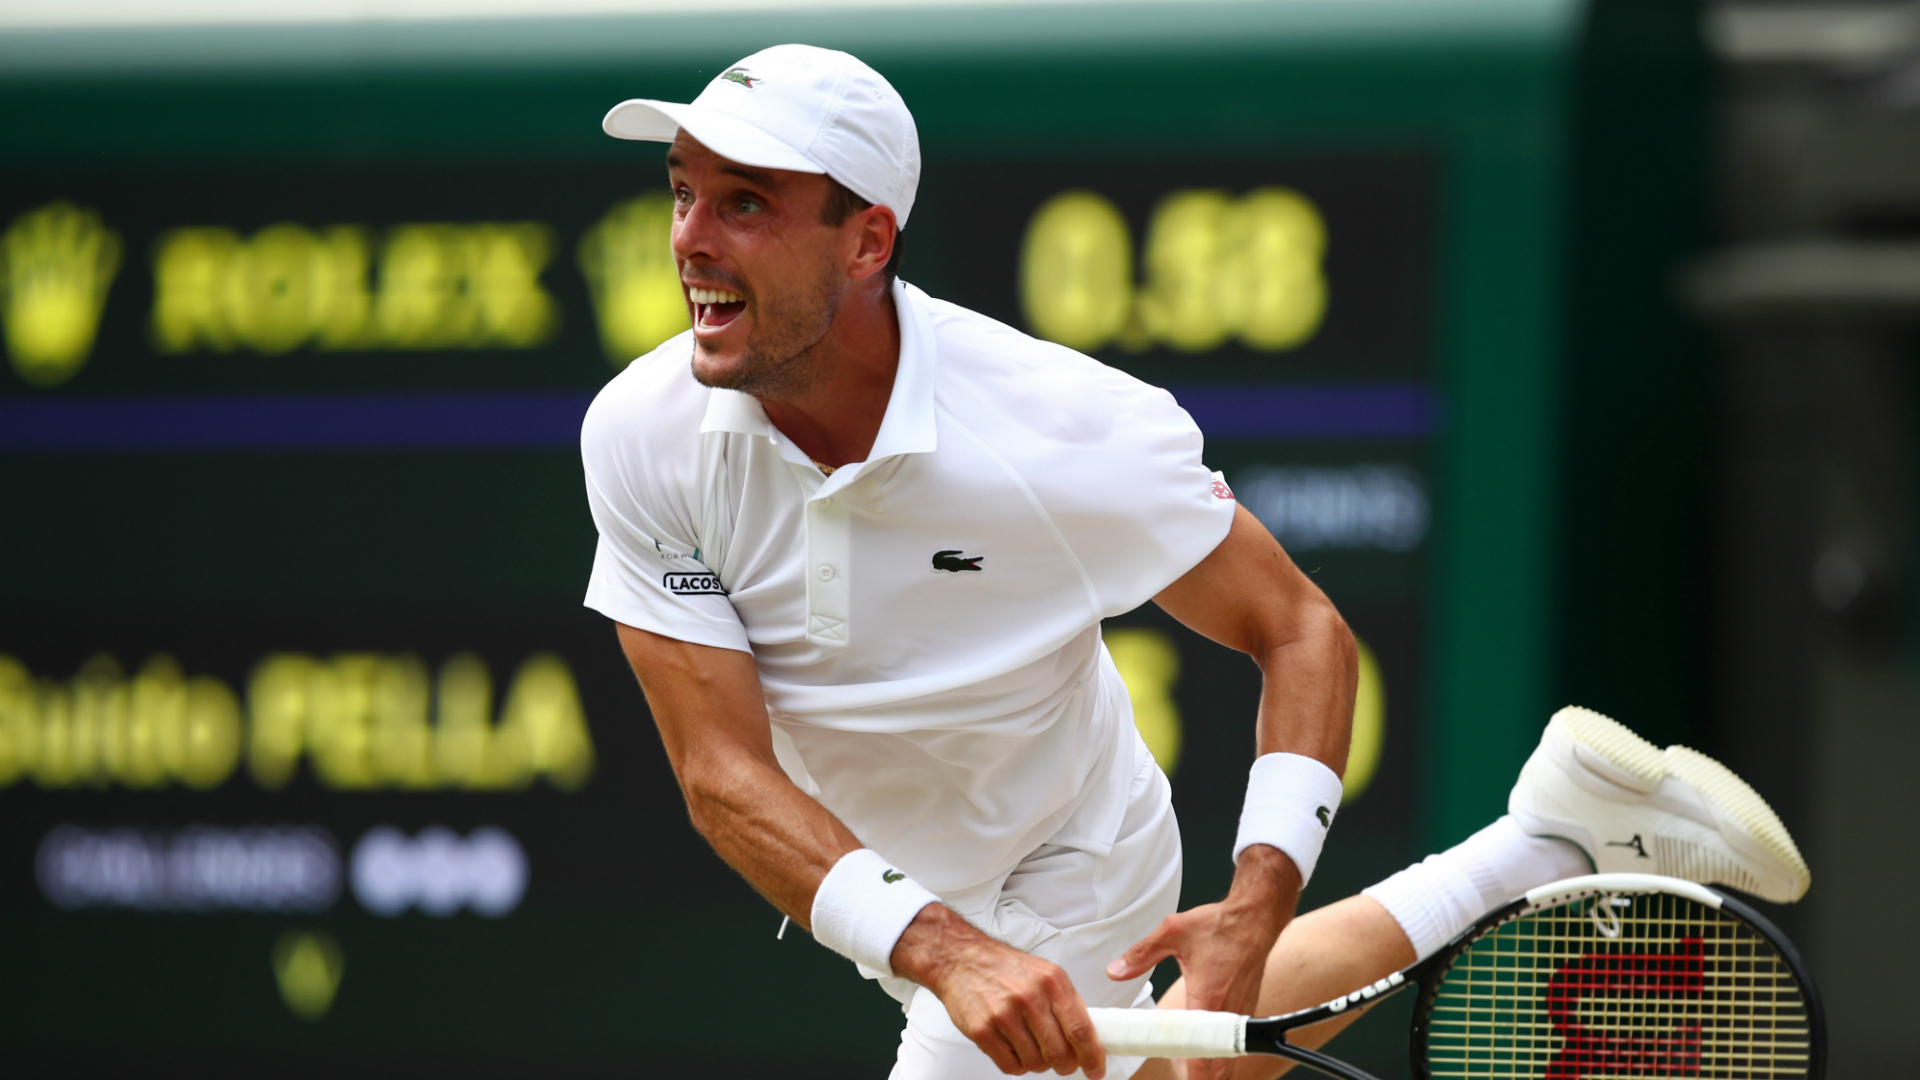 Novak Djokovic lies in wait for Roberto Bautista Agut, who defeated Guido Pella in the quarter-finals of Wimbledon on Wednesday.